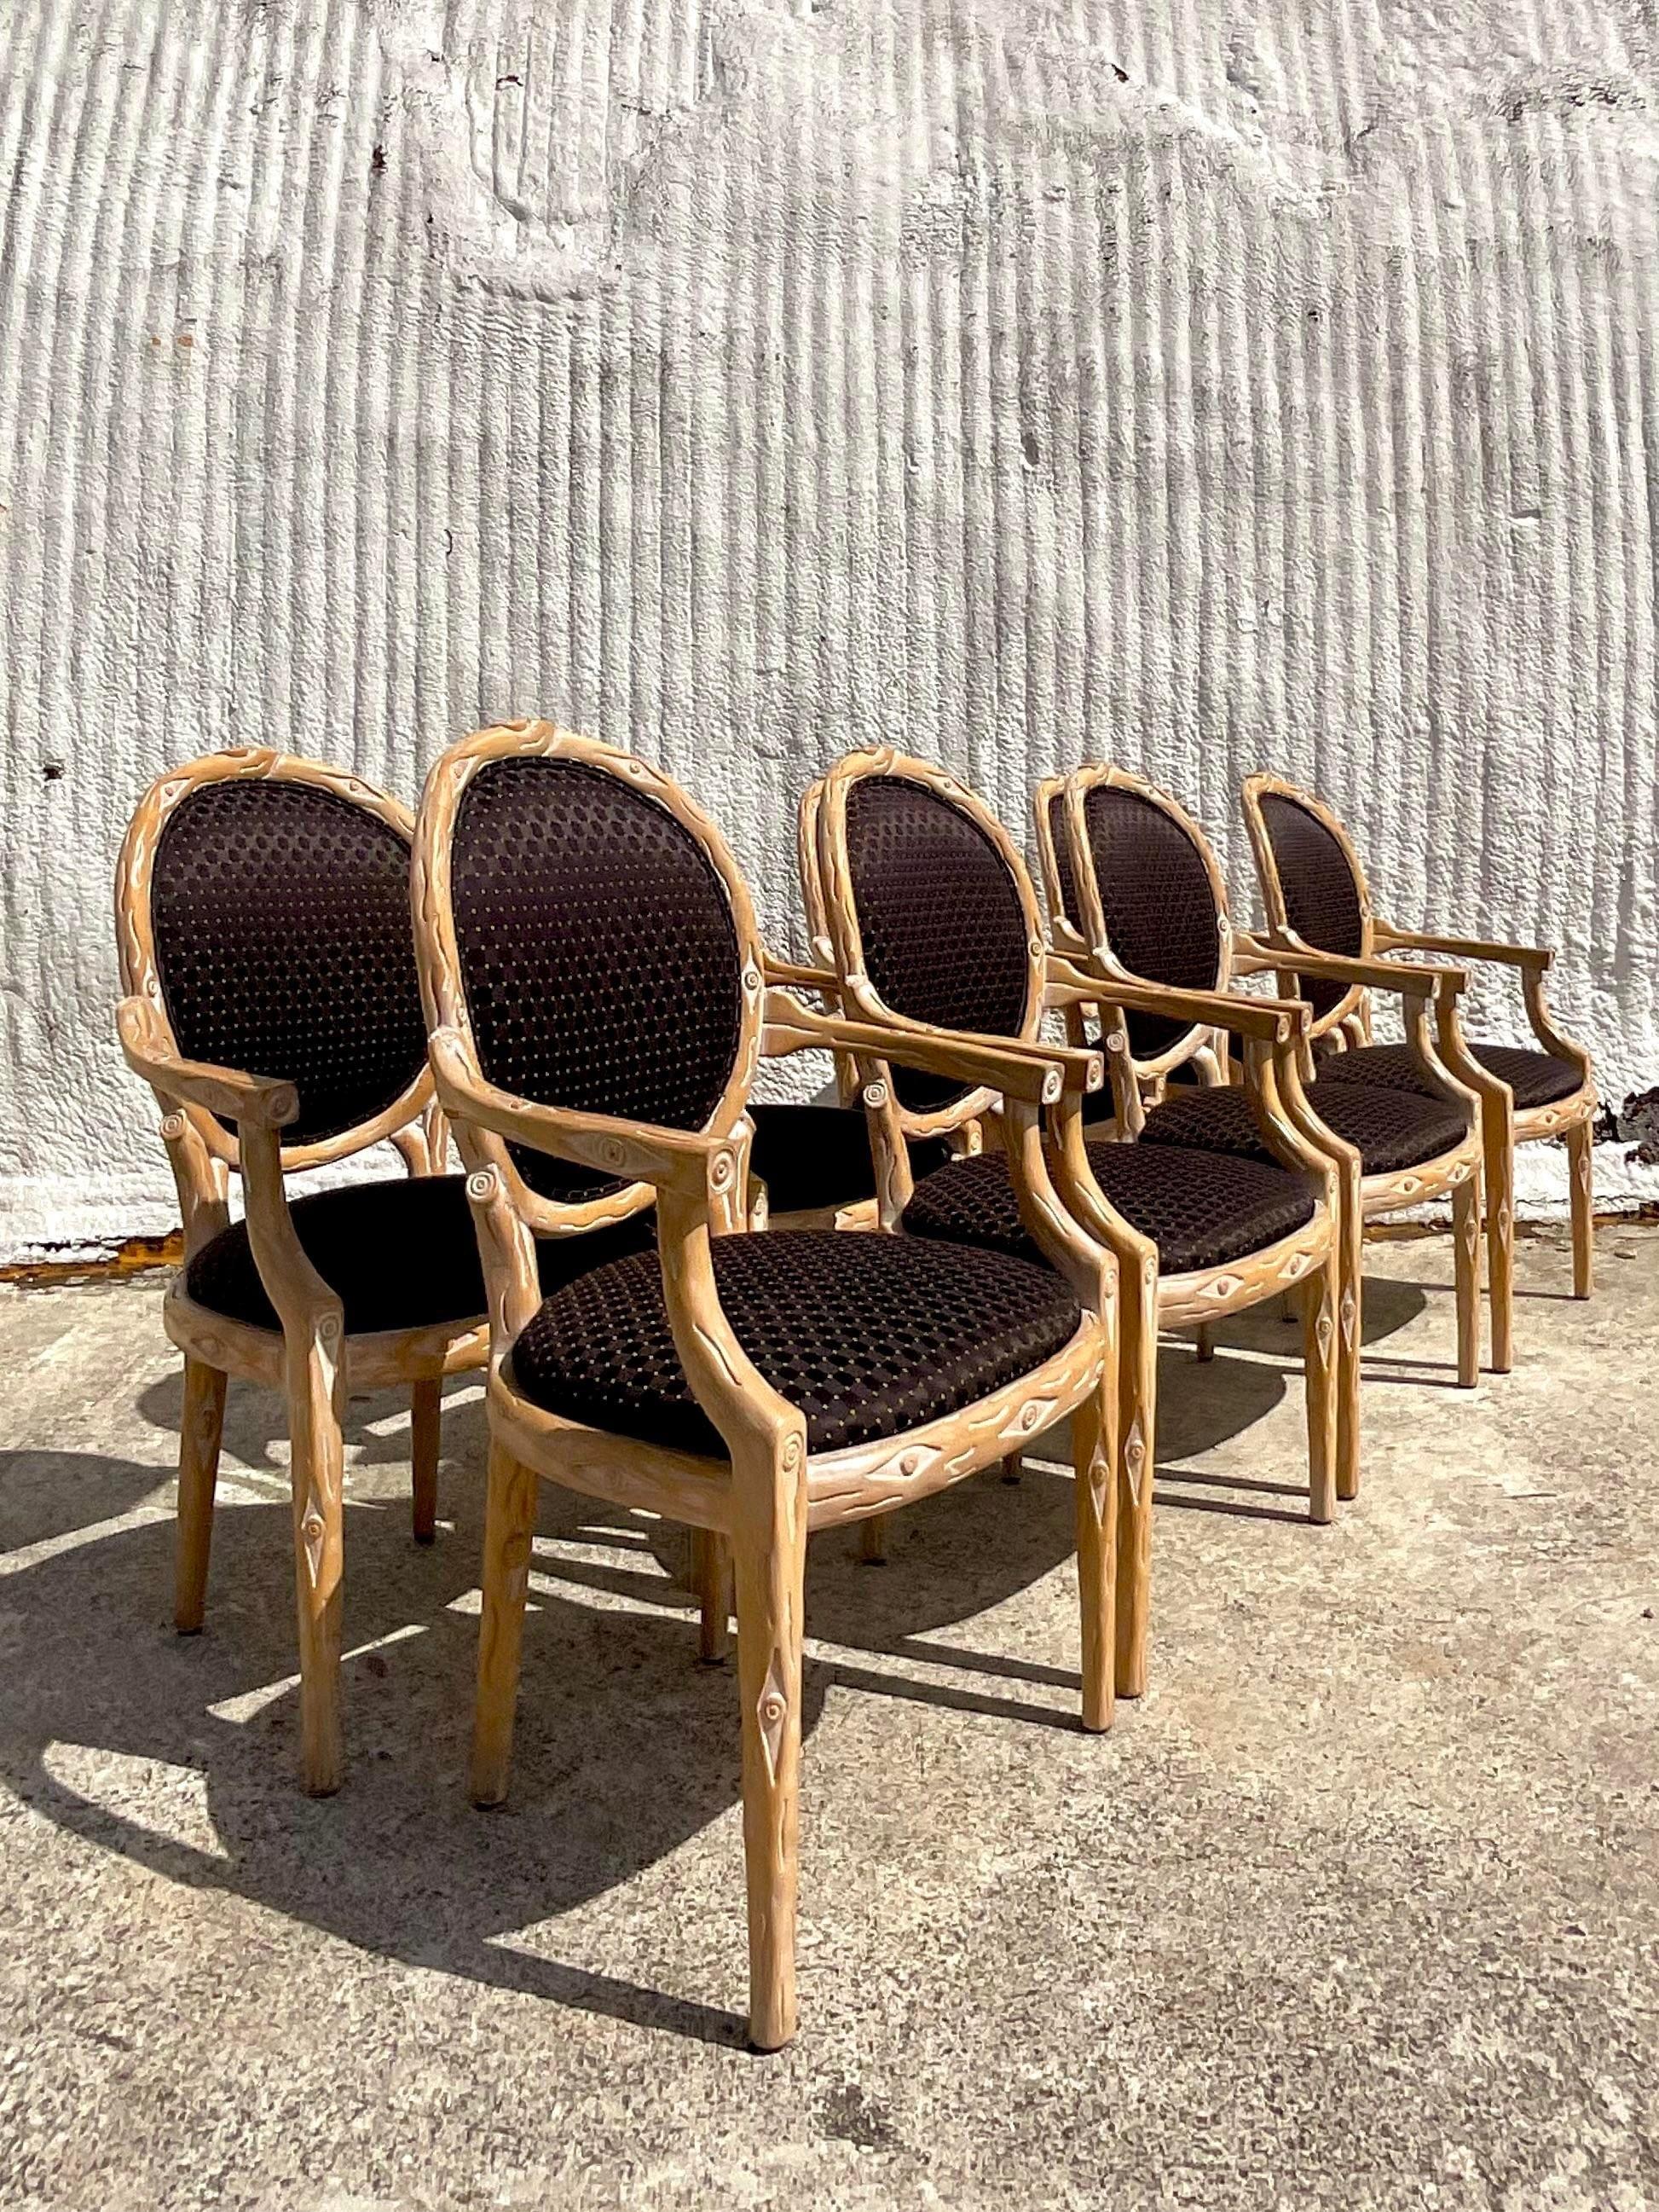 Vintage Boho Faux Bois Dining Chairs - Set of 8 For Sale 2